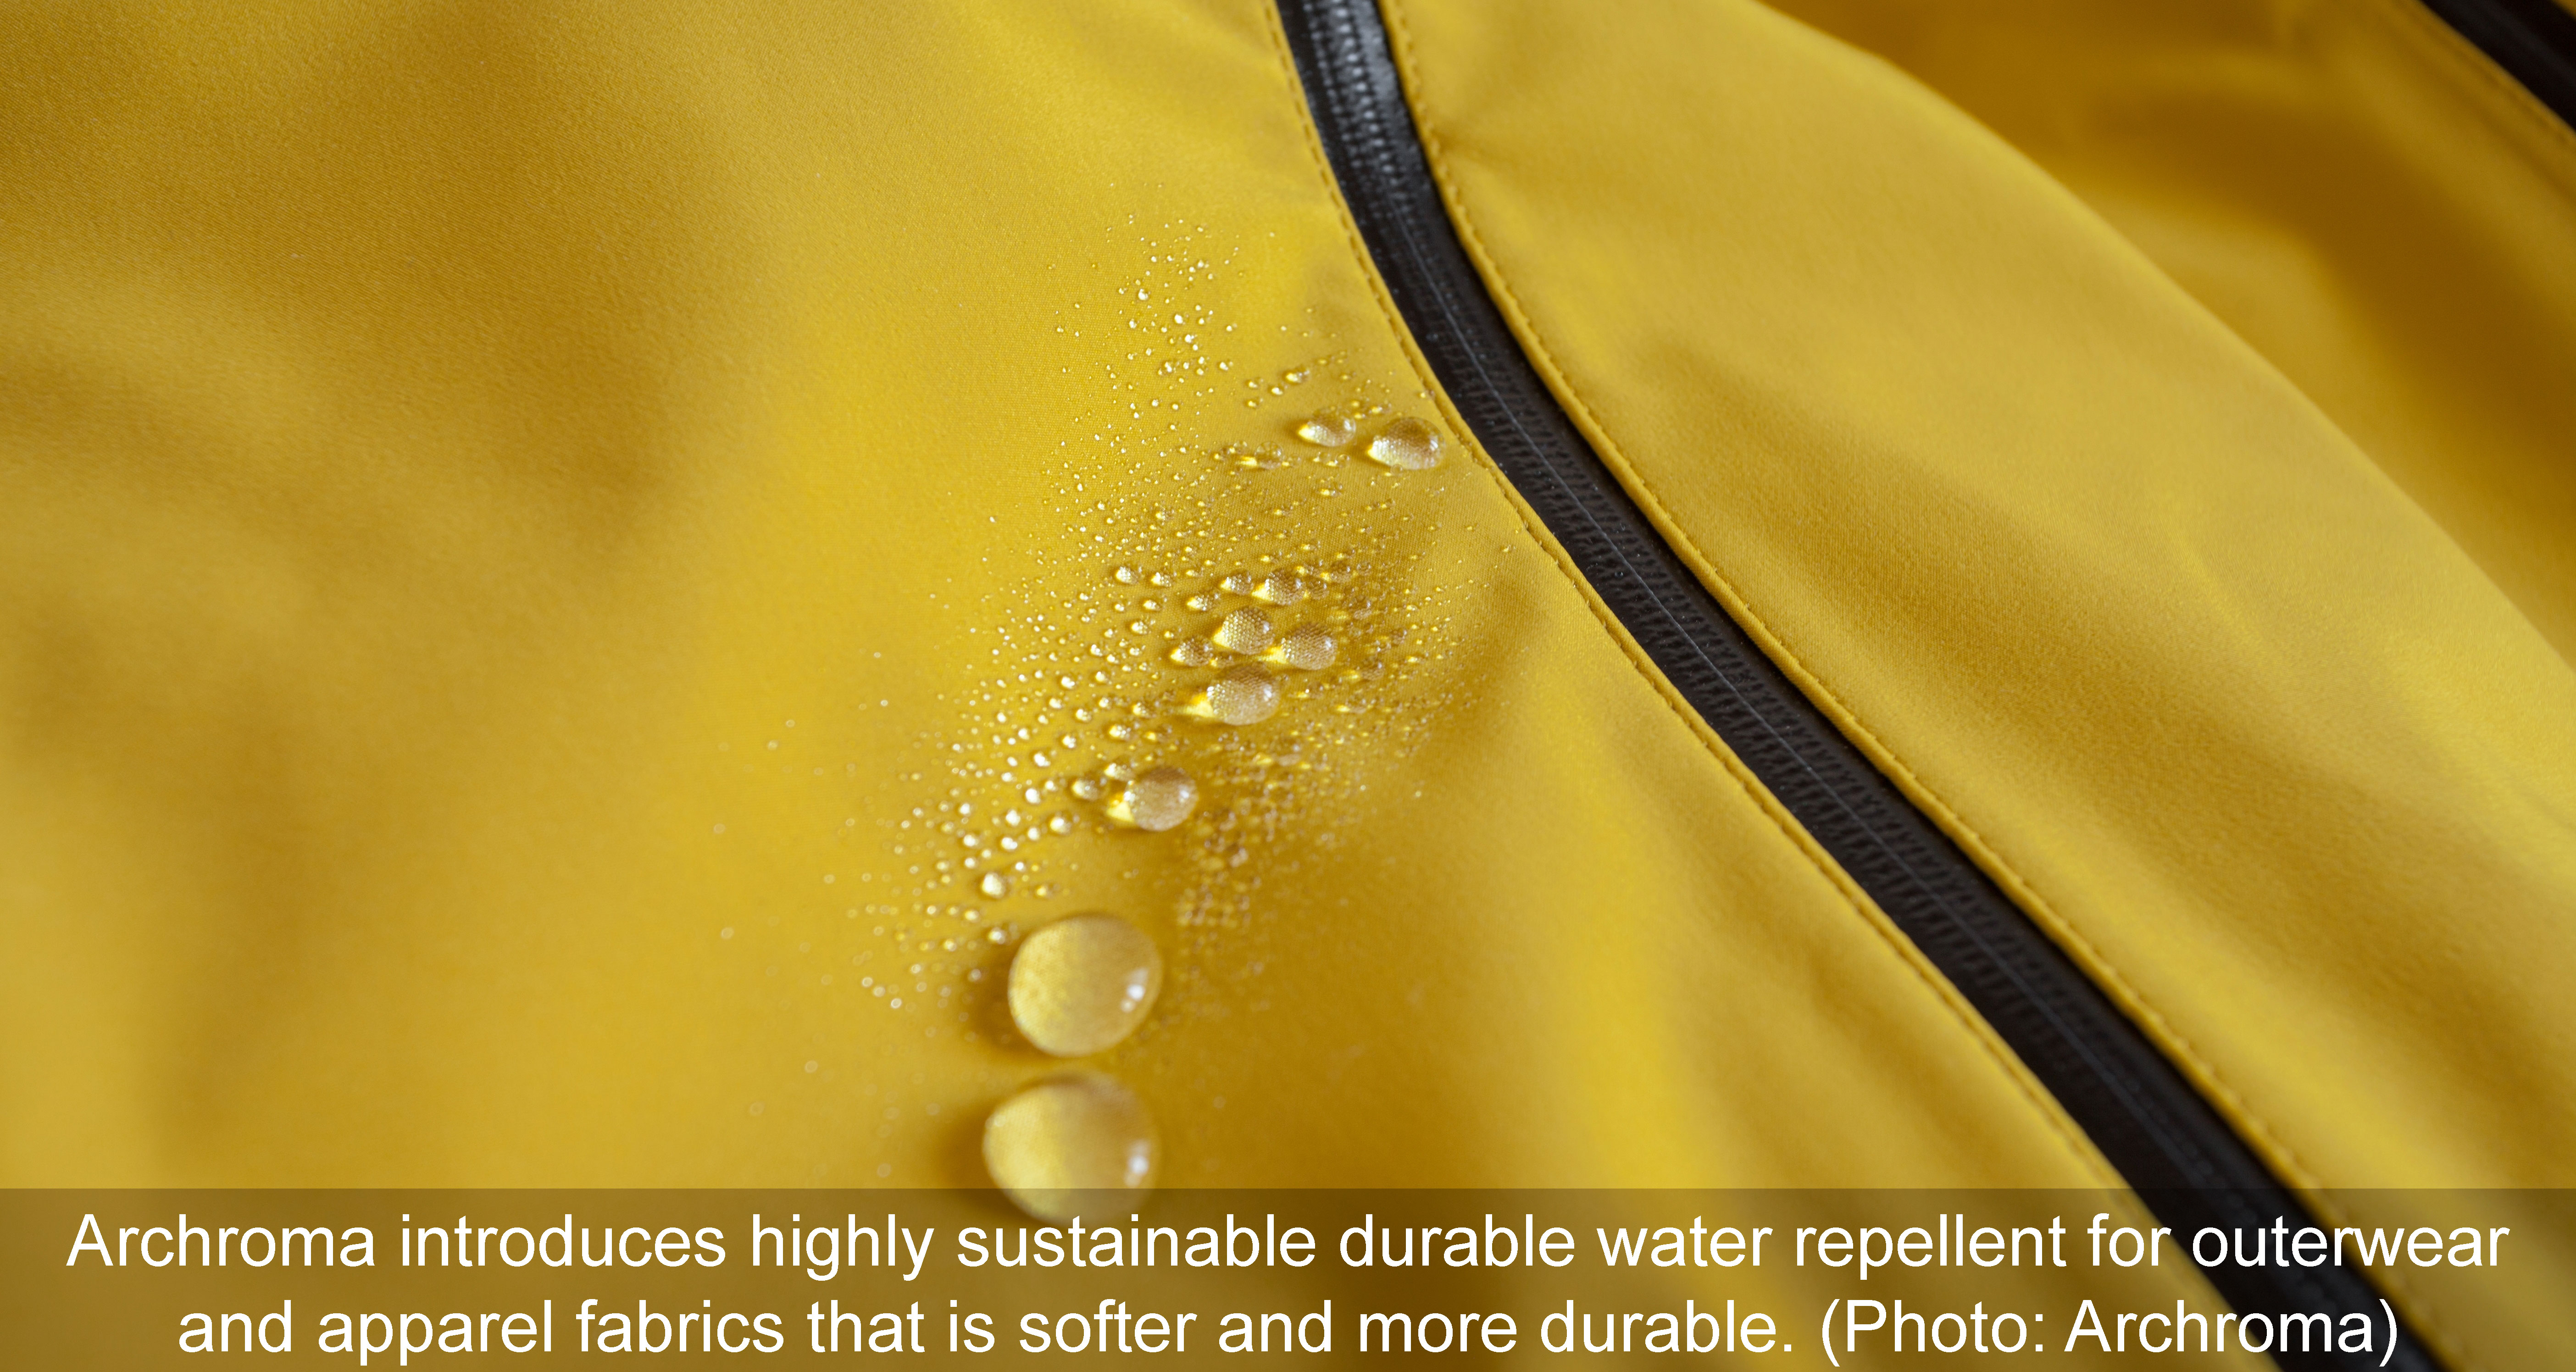 Archroma introduces highly sustainable durable water repellent for outerwear and apparel fabrics